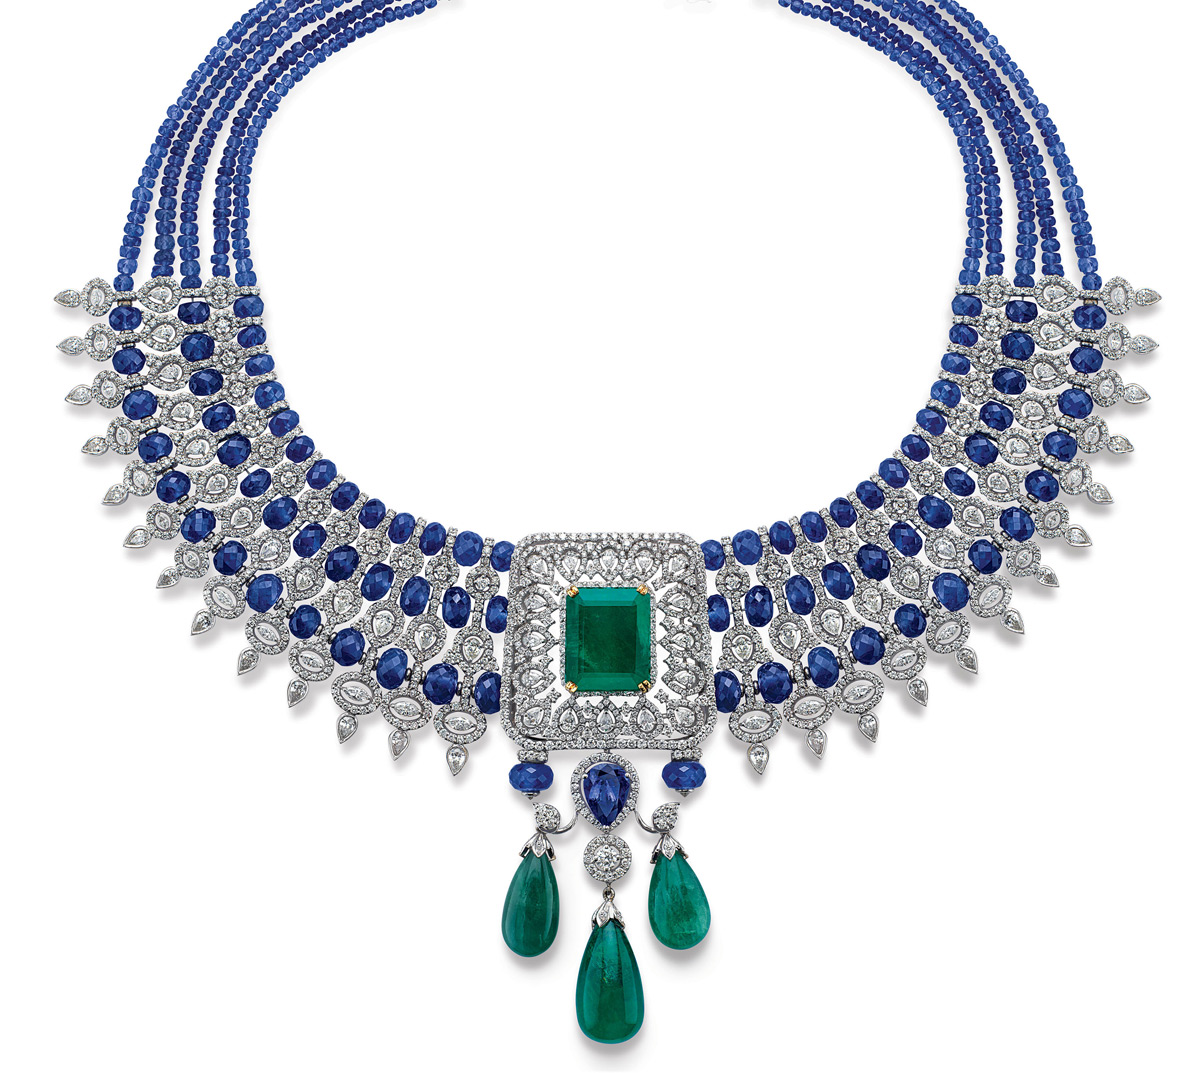 House of Rose necklace with tanzanites, emeralds and diamonds